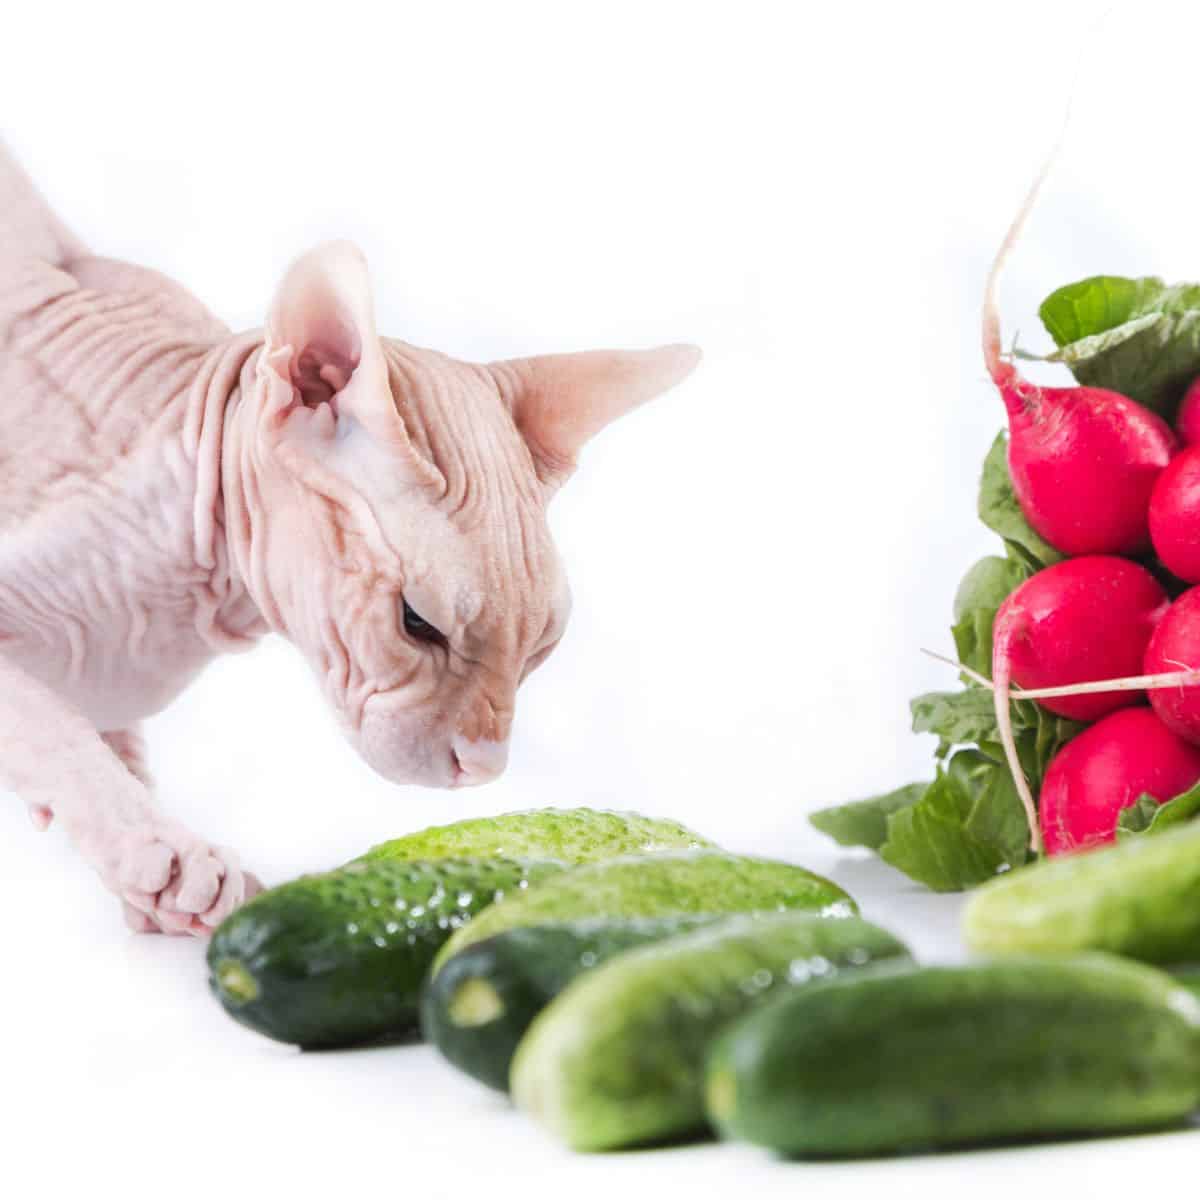 Sphynx cat sniffing the cucmbers